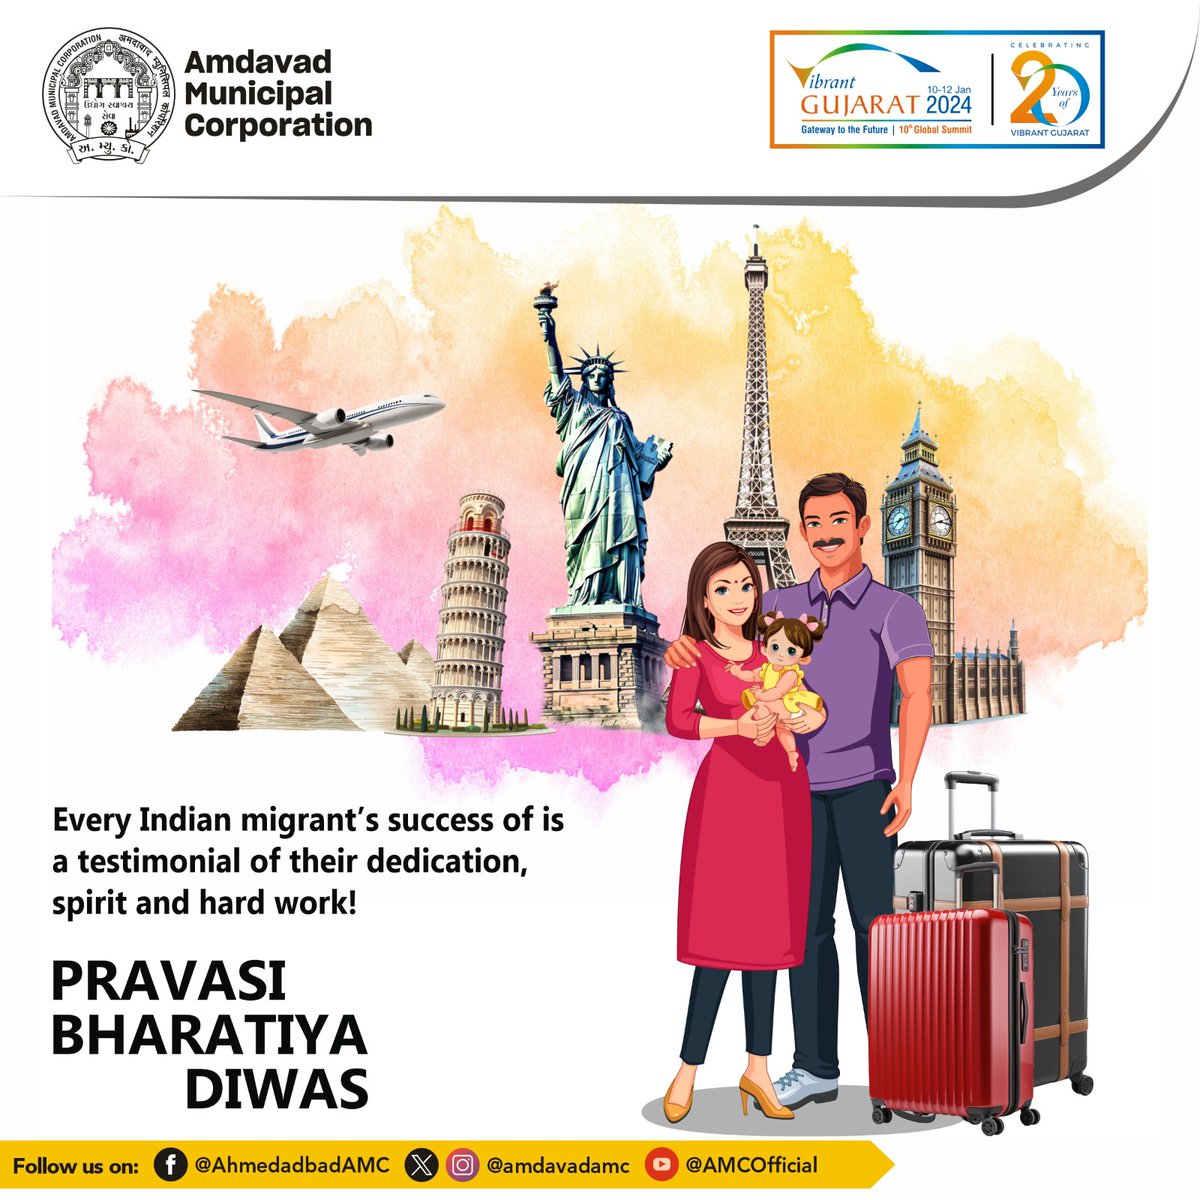 Hoping that all NRIs stay connected to their roots and continue serving the country.

#amc #amcforpeople #pravasibharatiyadiwas #ahmedabad #municipalcorporation